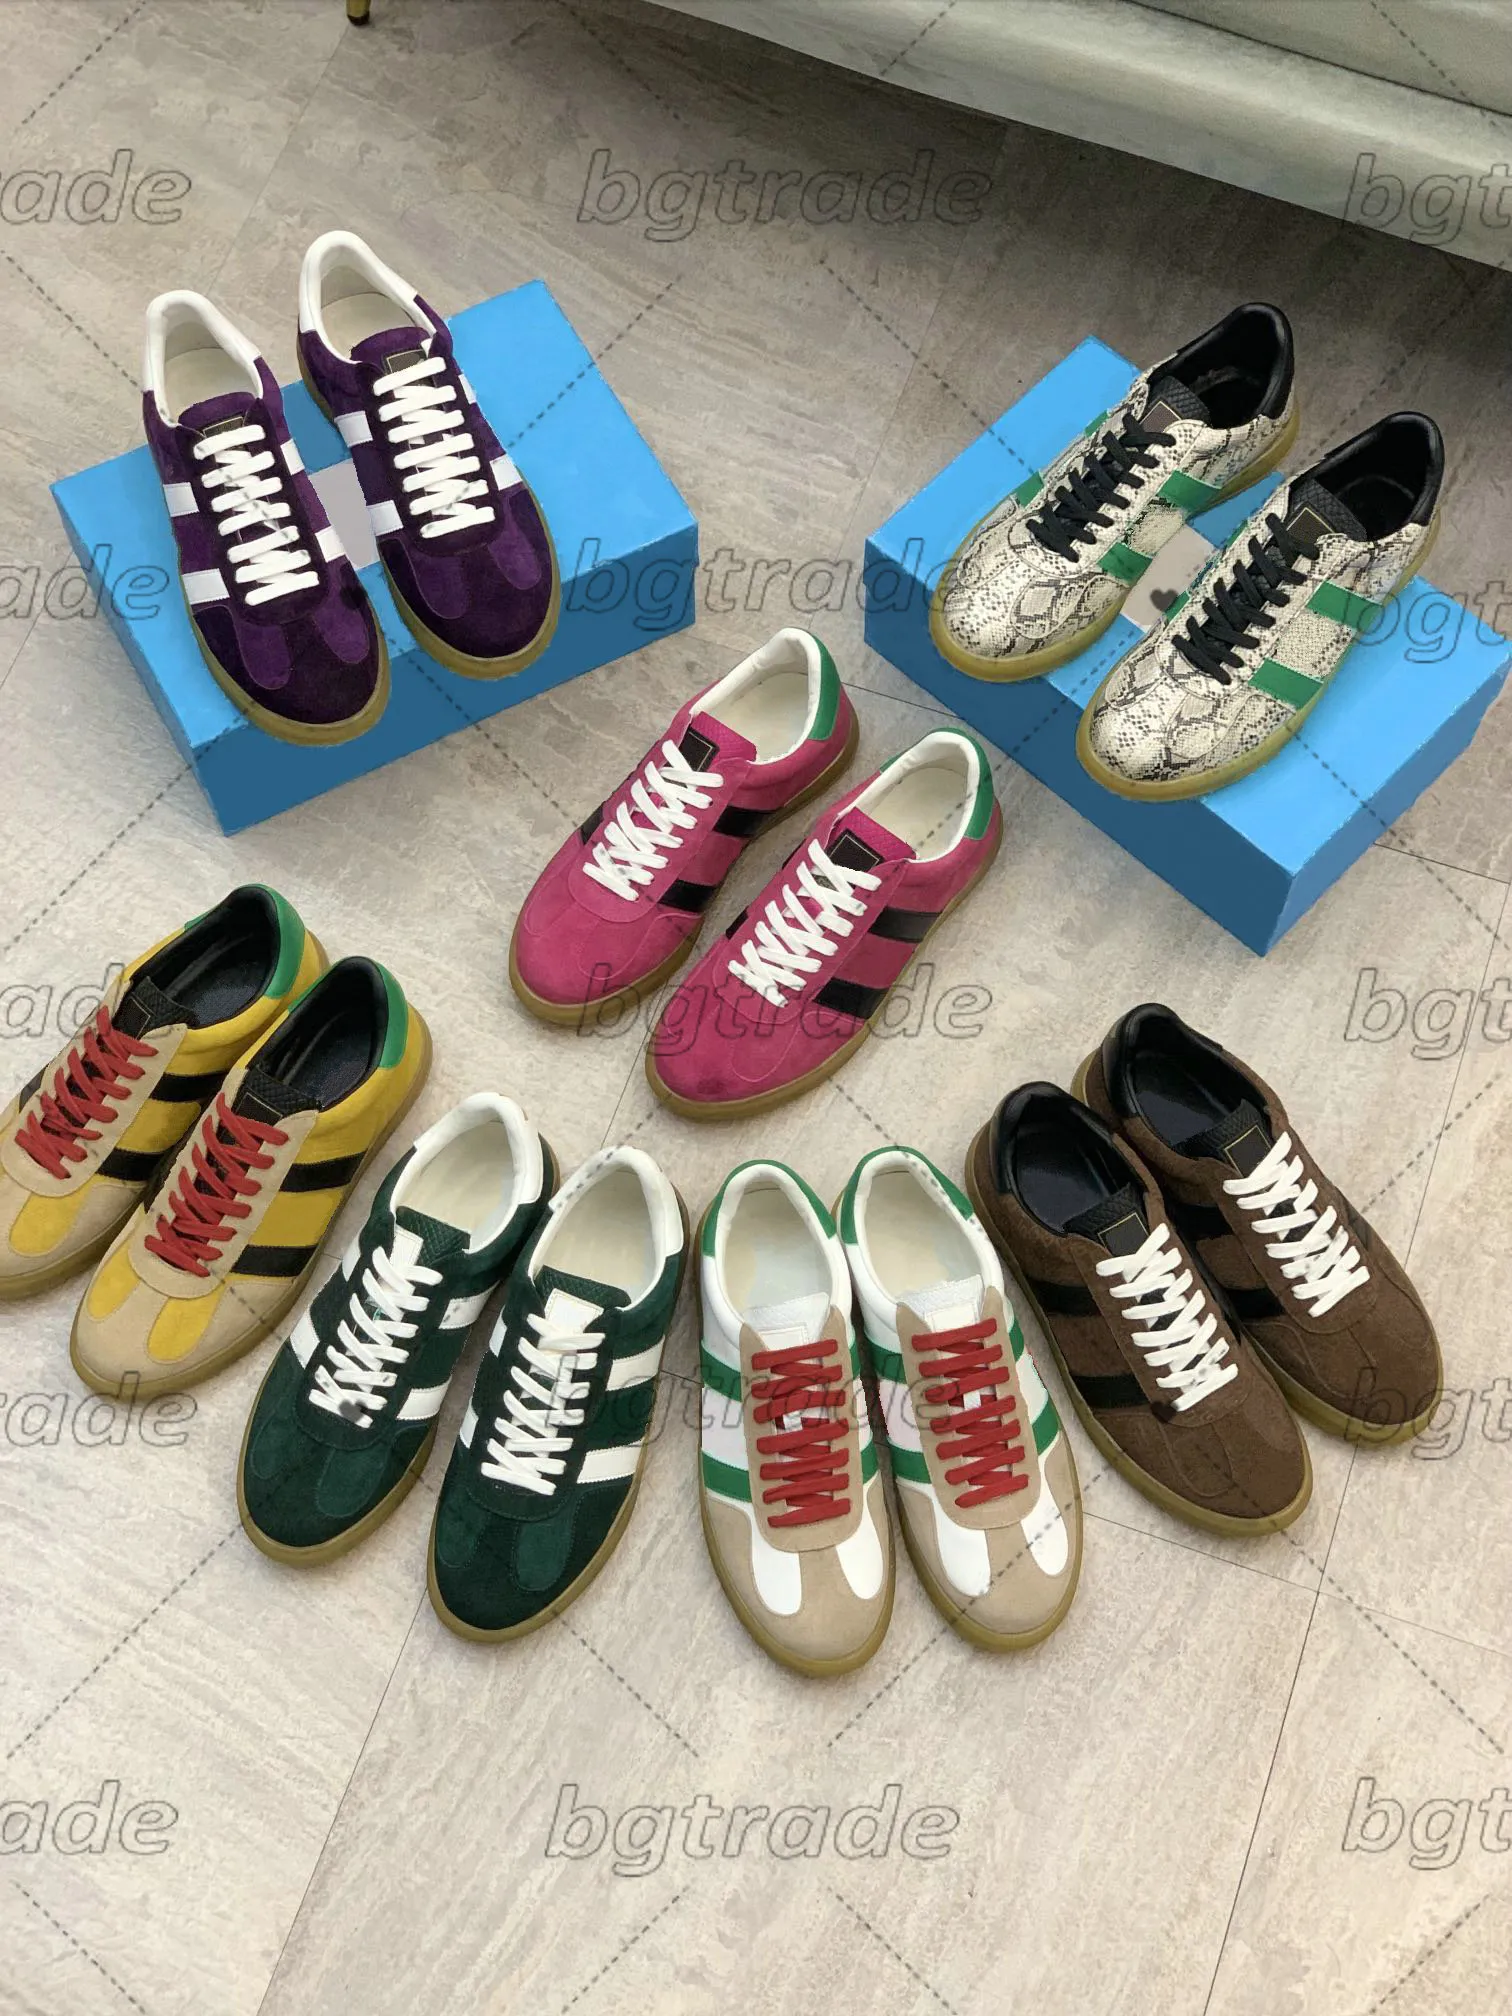 2022 Mens Joint Name Lace-up Sneaker Luxury Leather Clover Shoes Italy Casual Outdoor Sports Running Trainers Sneakers